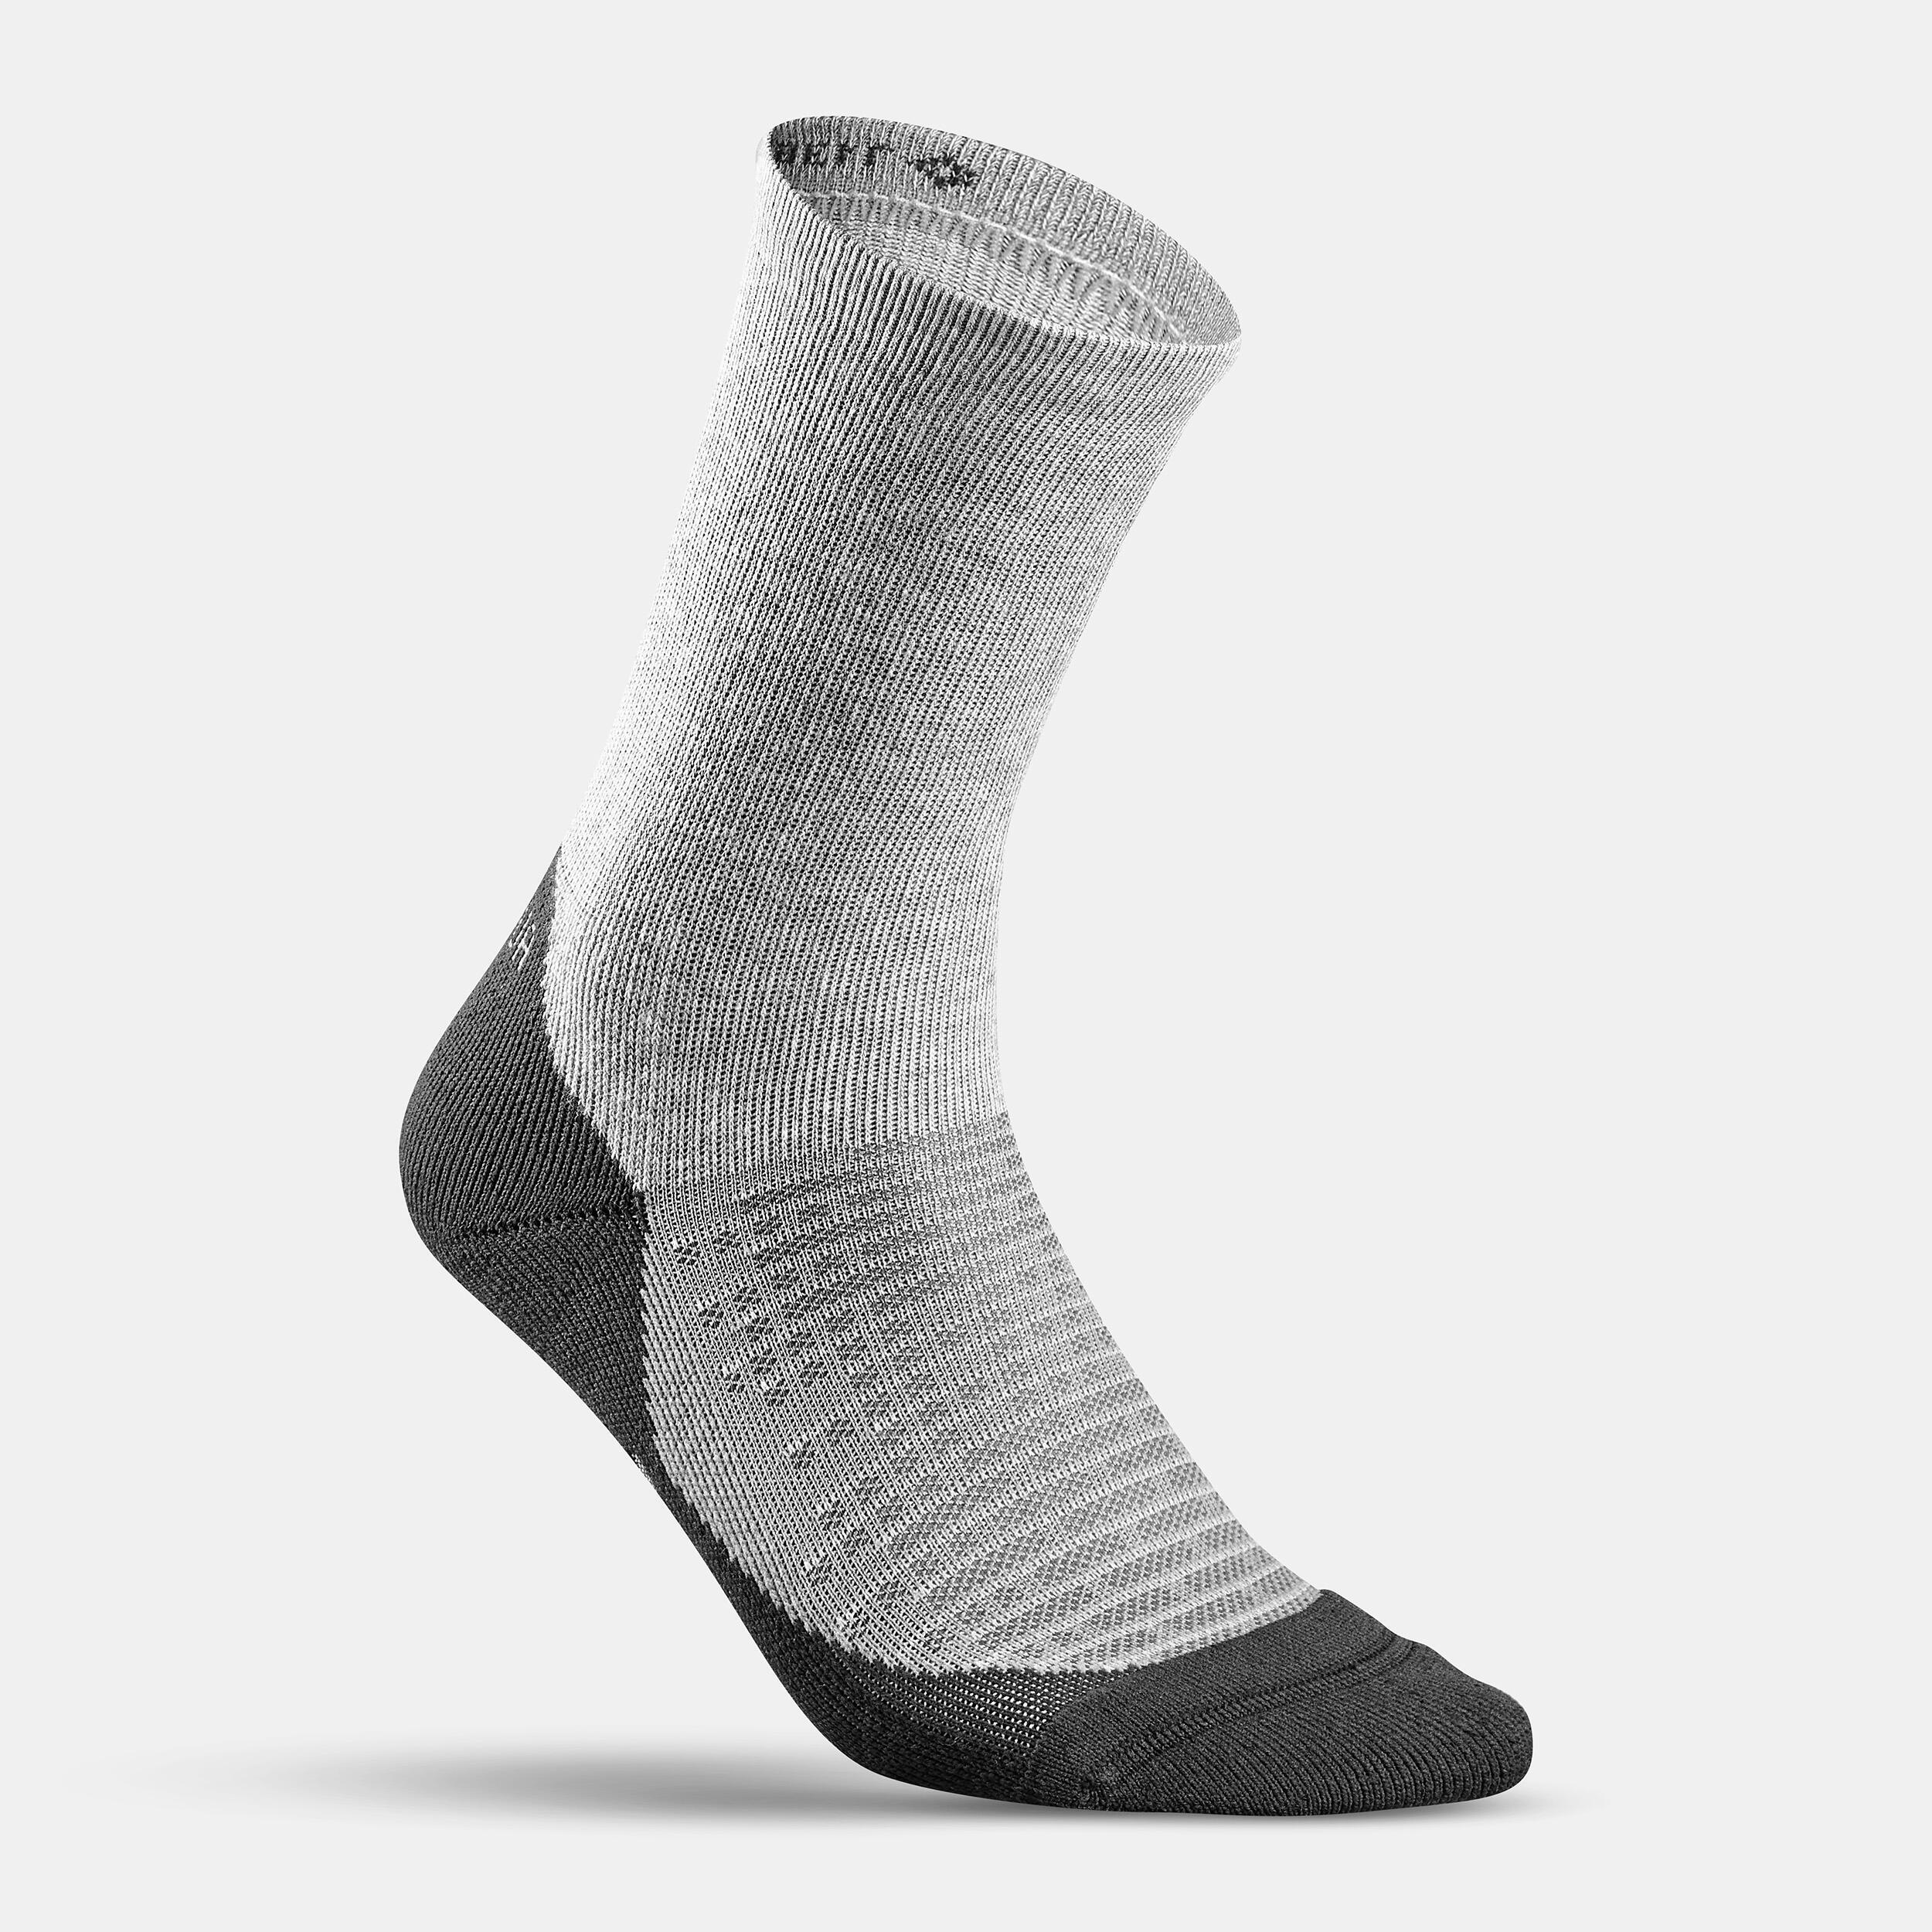 Sock Hike 100 High  - Pack of 2 pairs - Grey and Blue 4/9